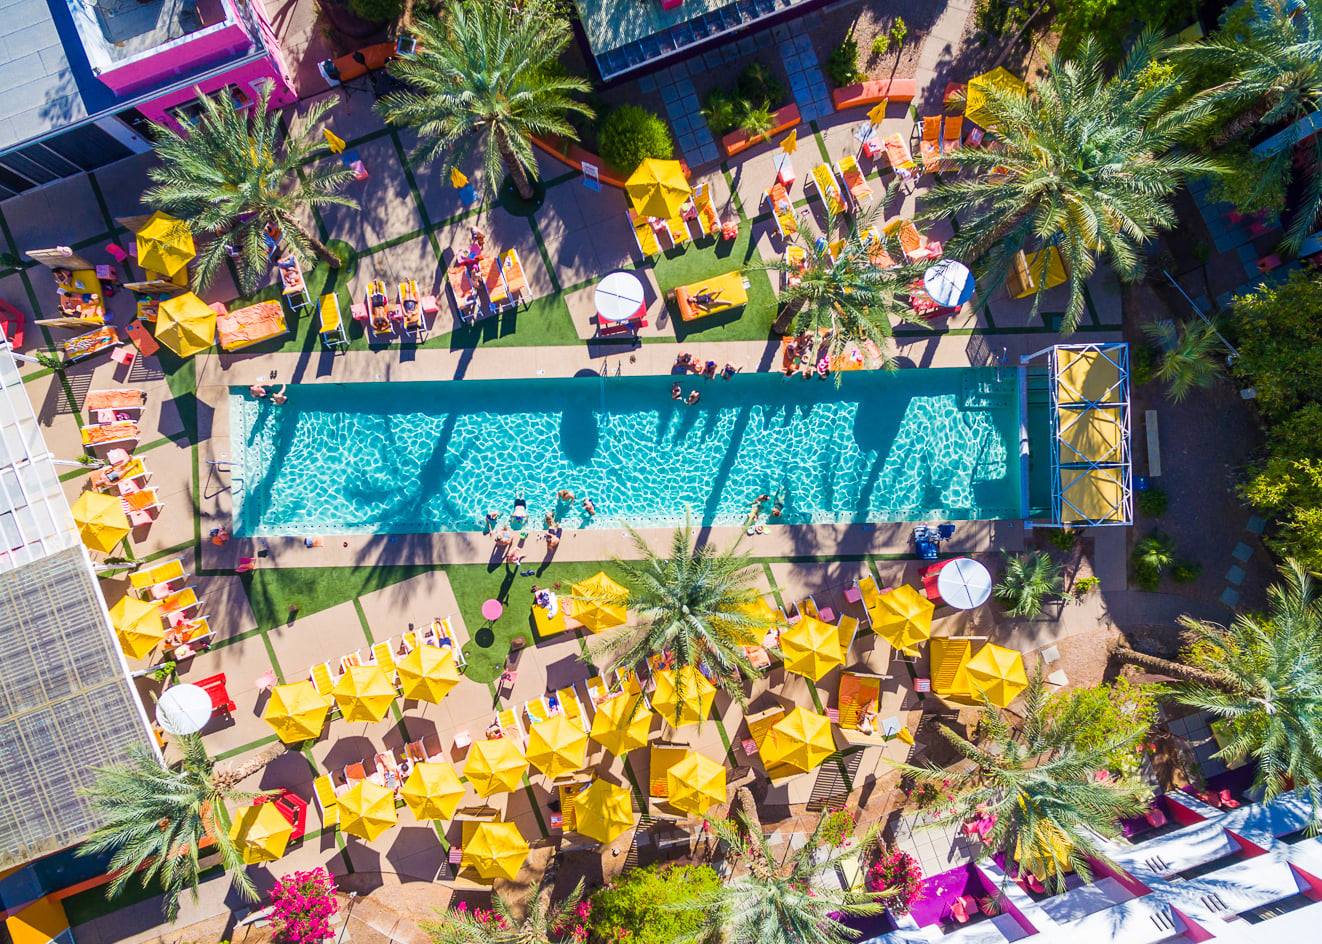 The Saguaro Hotel brims with colorful charm